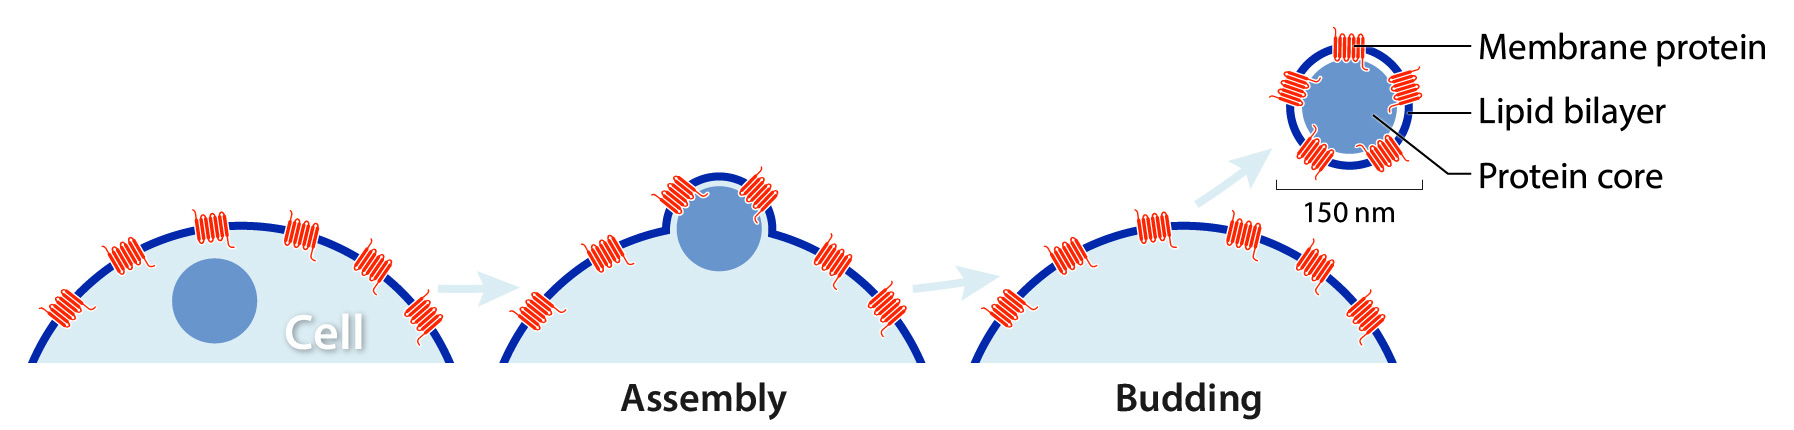 Lipoparticle assembly and budding. A protein core moves from inside the cell; it buds off, carrying with it a surrounding lipid bilayer covered in membrane proteins.